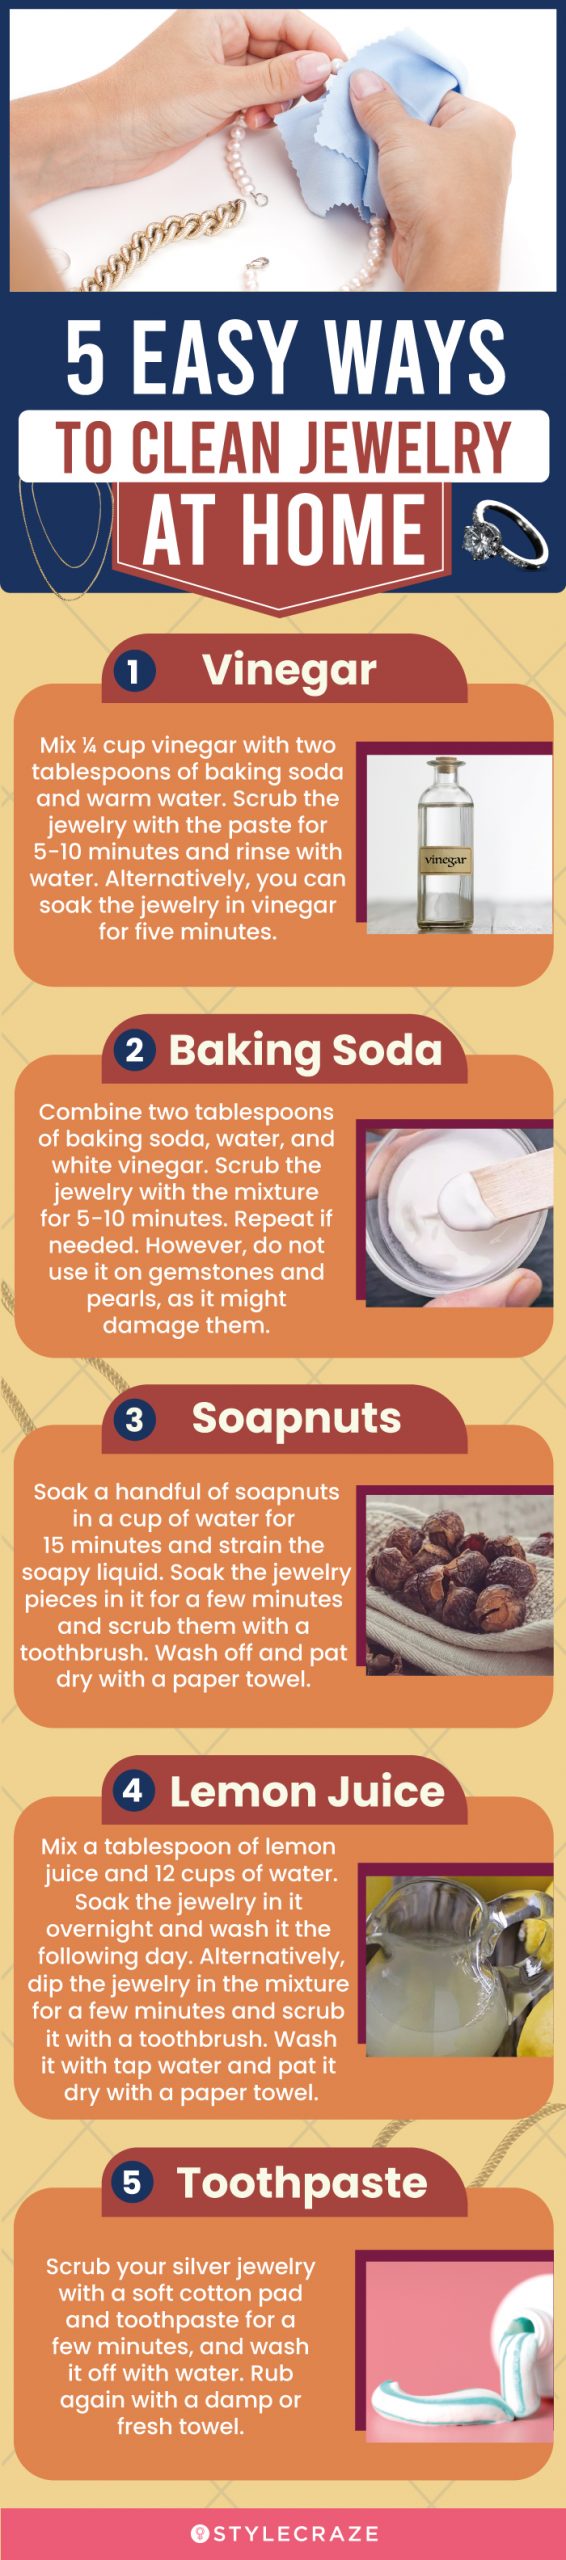 5 easy way to clean jewelery at home (infographic)